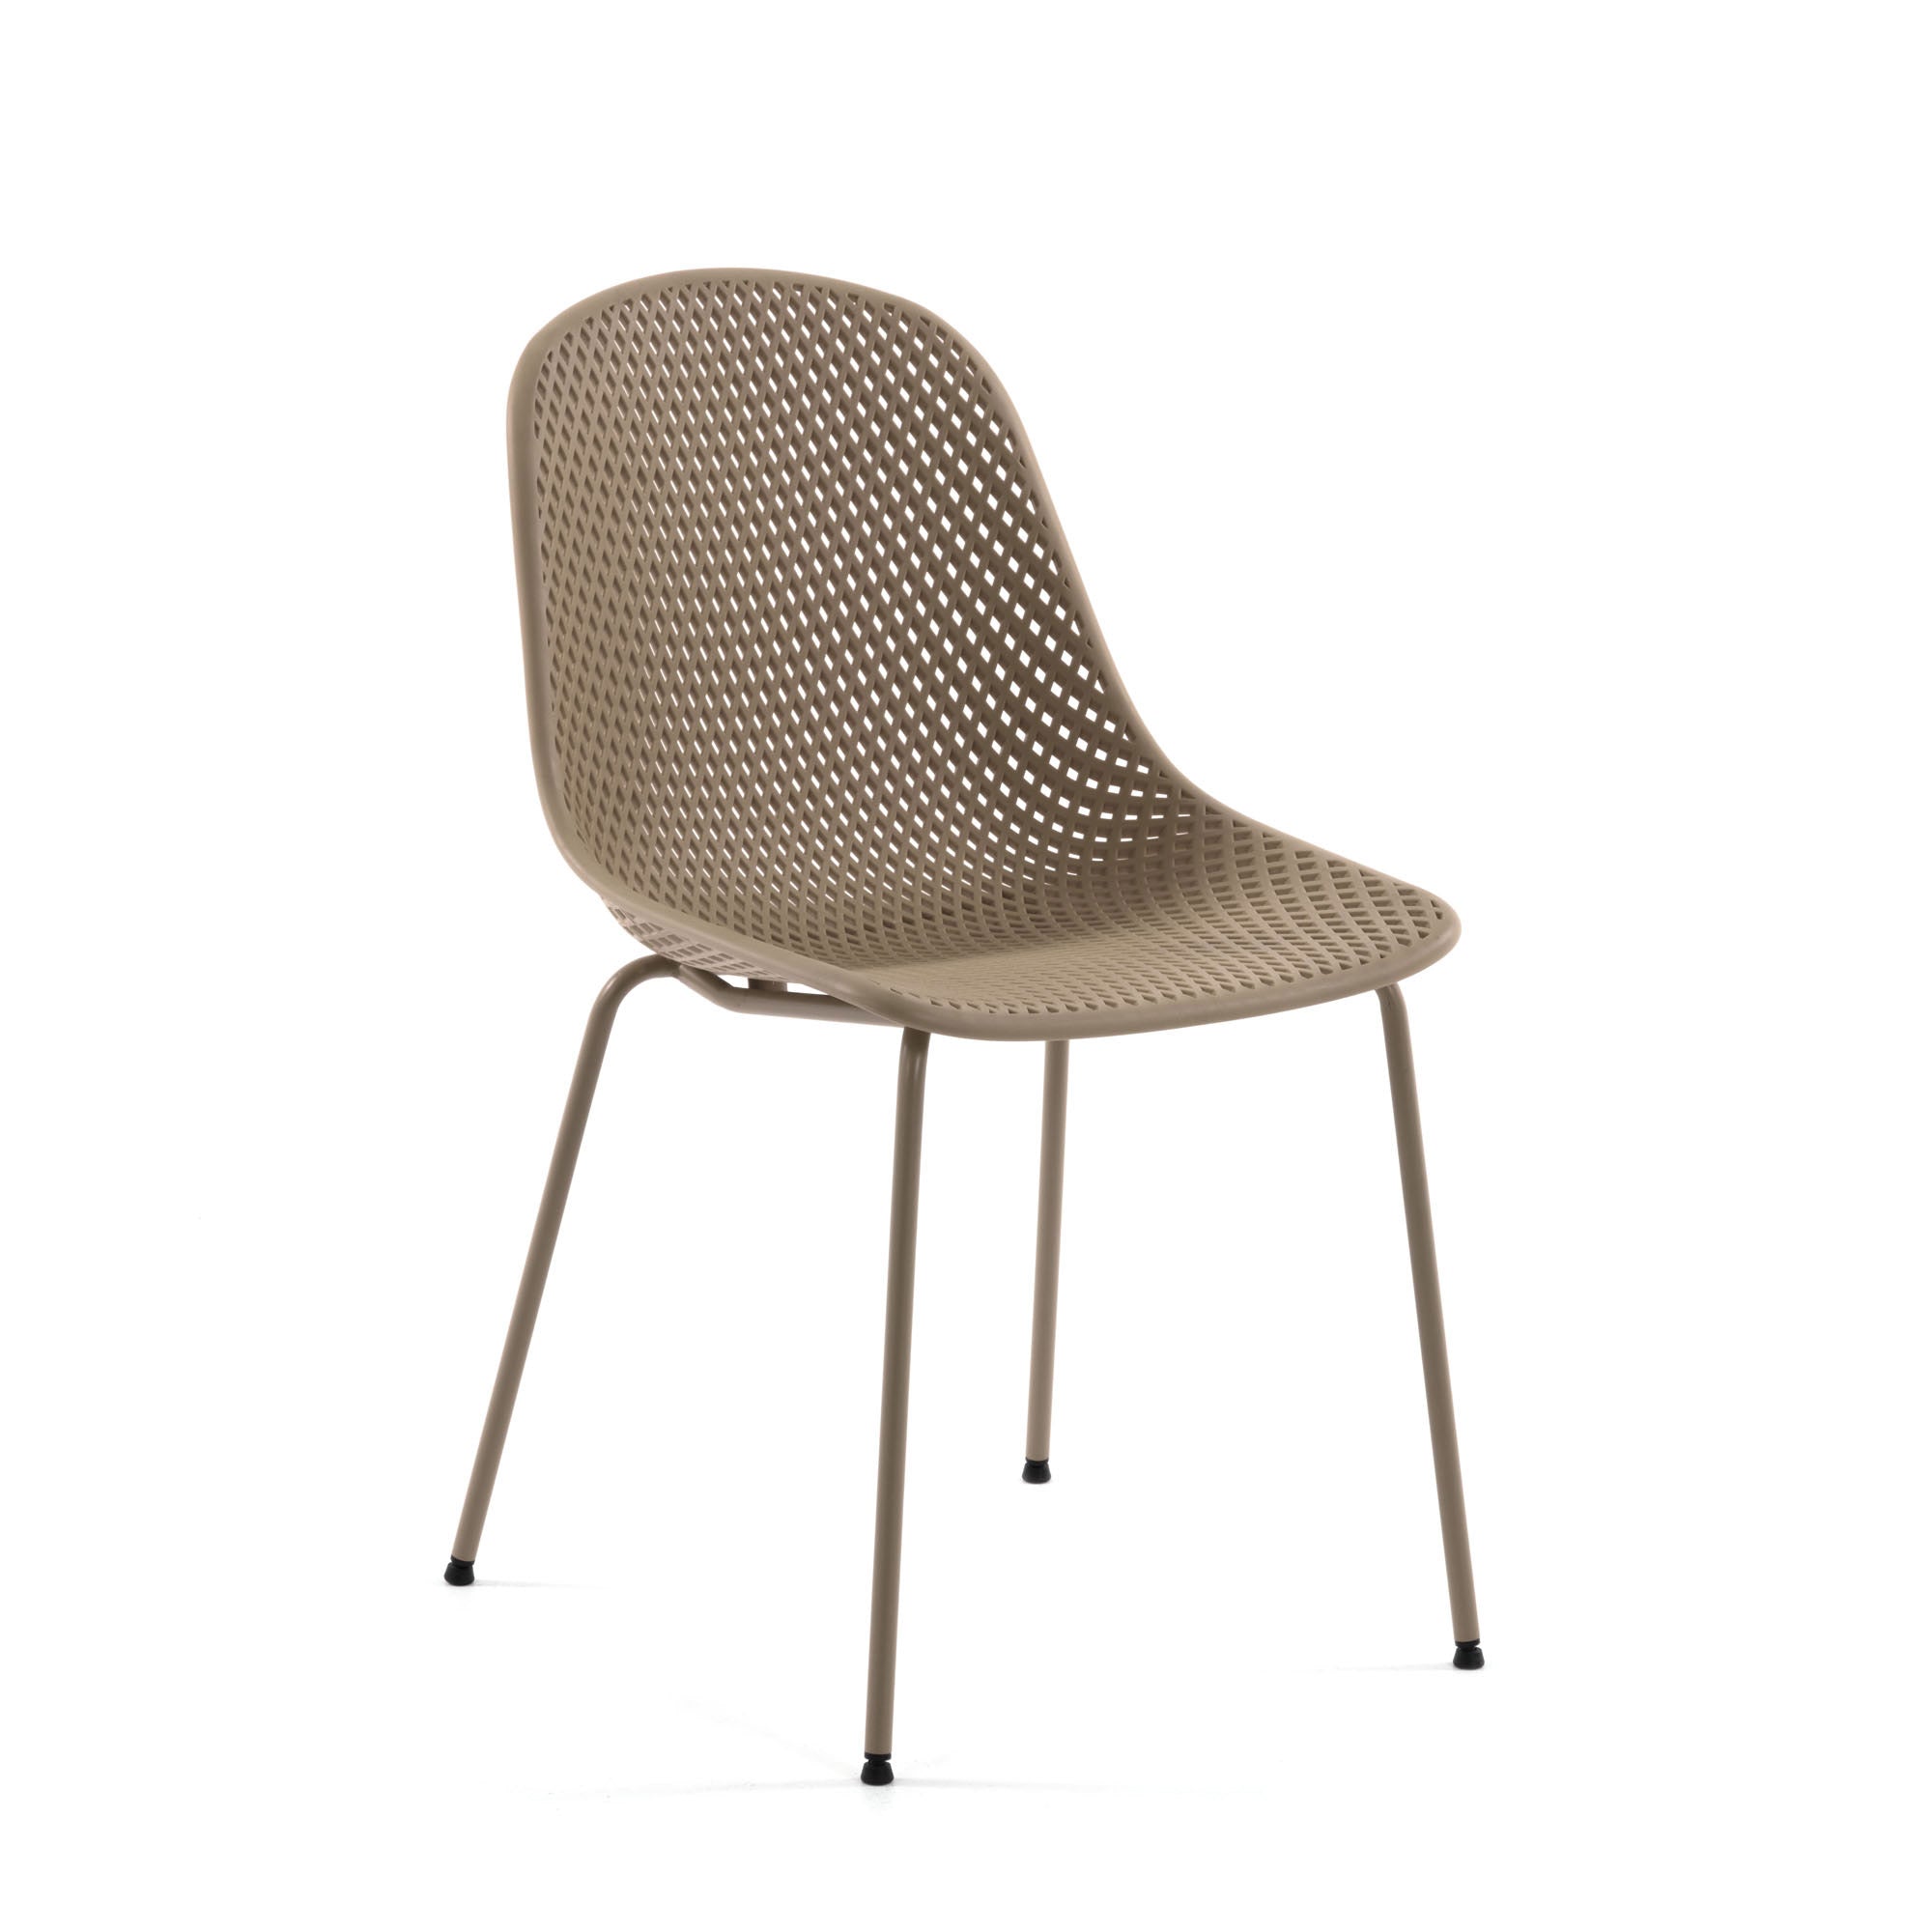 Quinby outdoor dining chair in beige